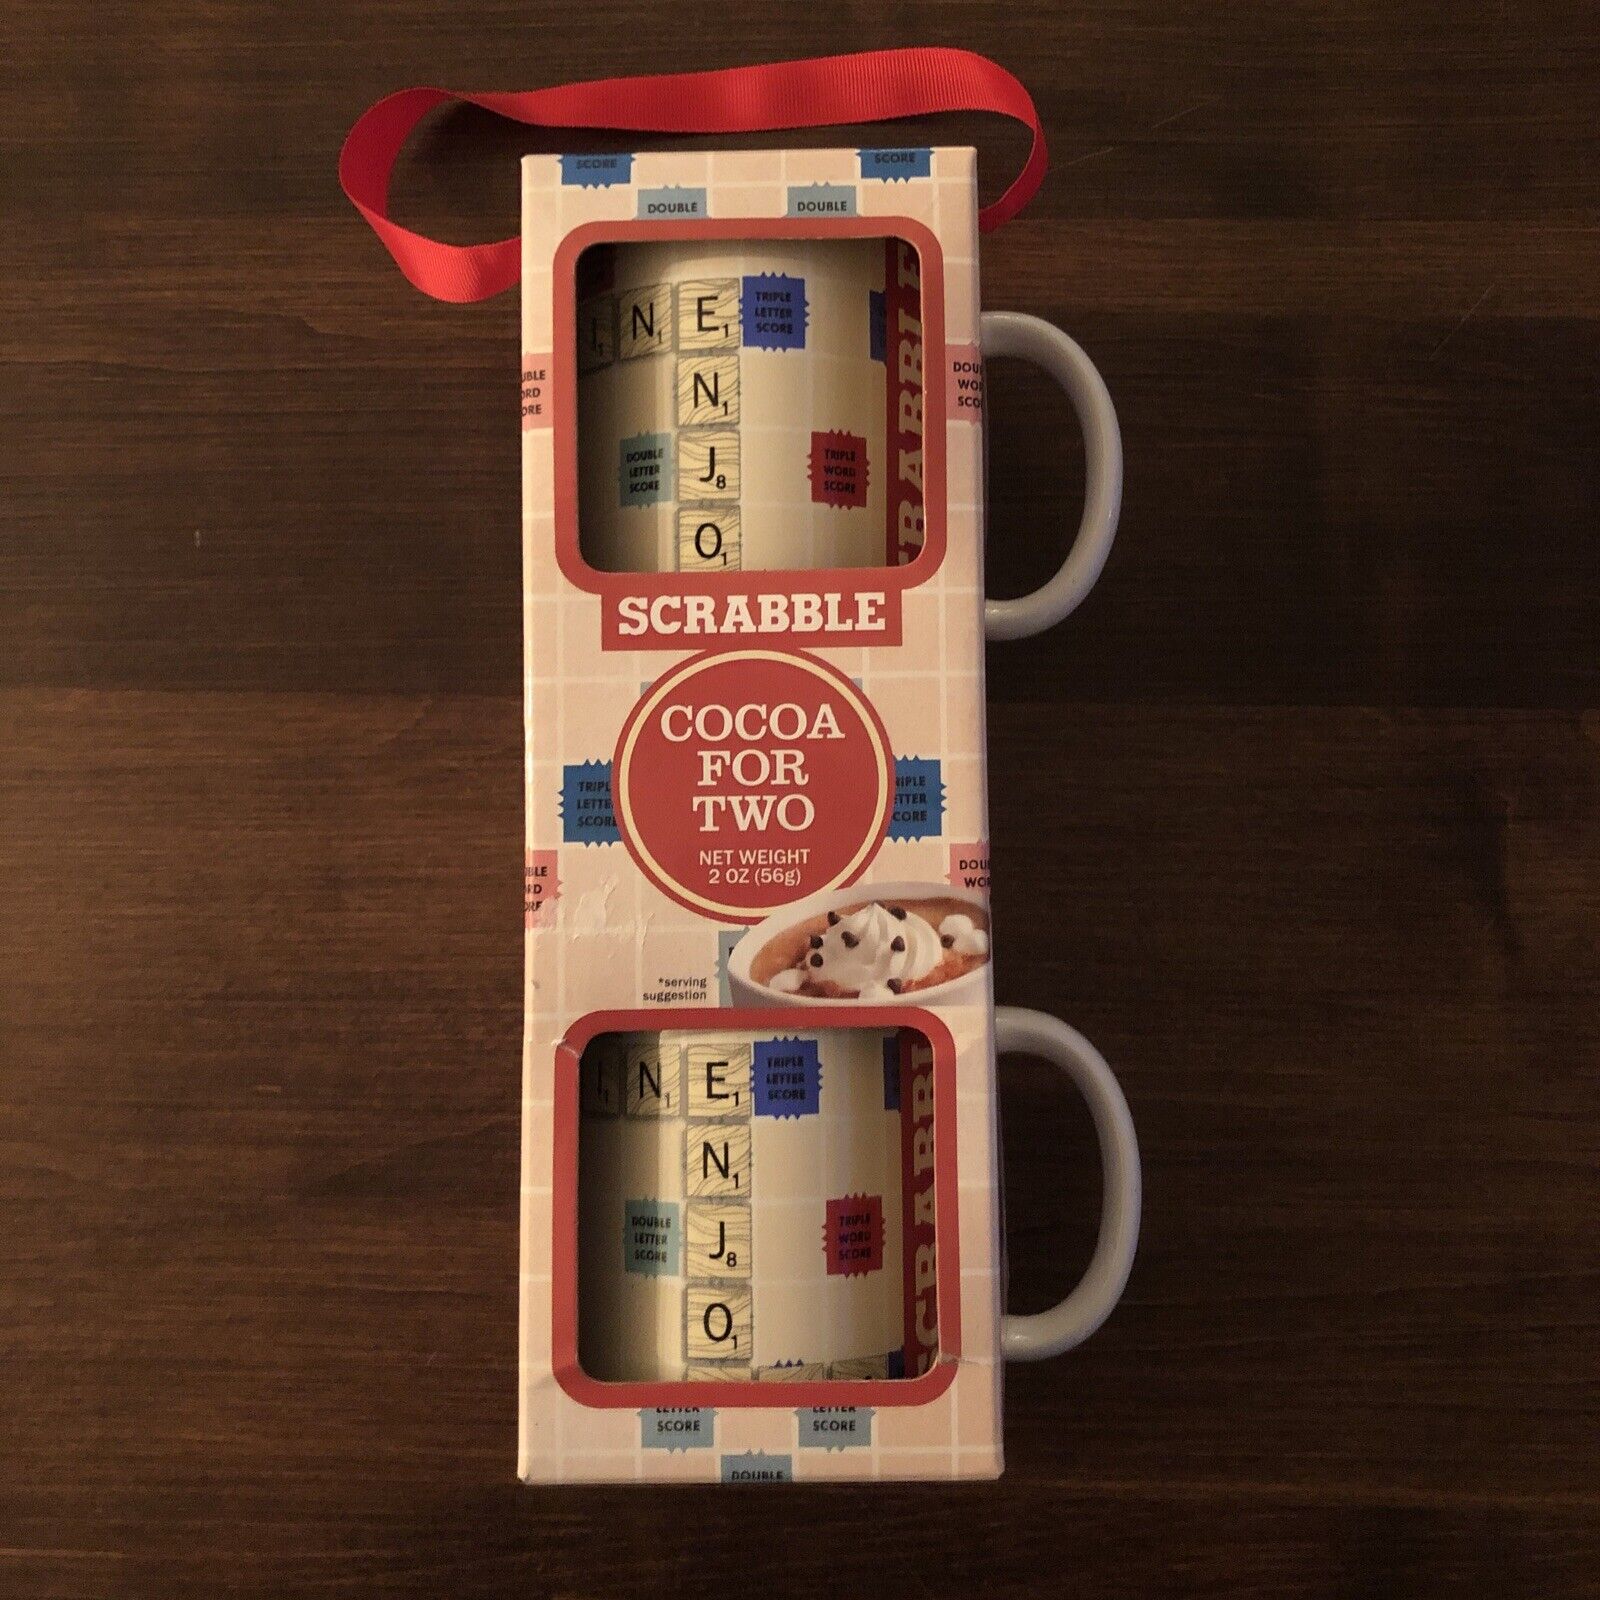 Scrabble Cocoa for Two Boxed Gift Set Coffee Cups Hasbro New Sealed